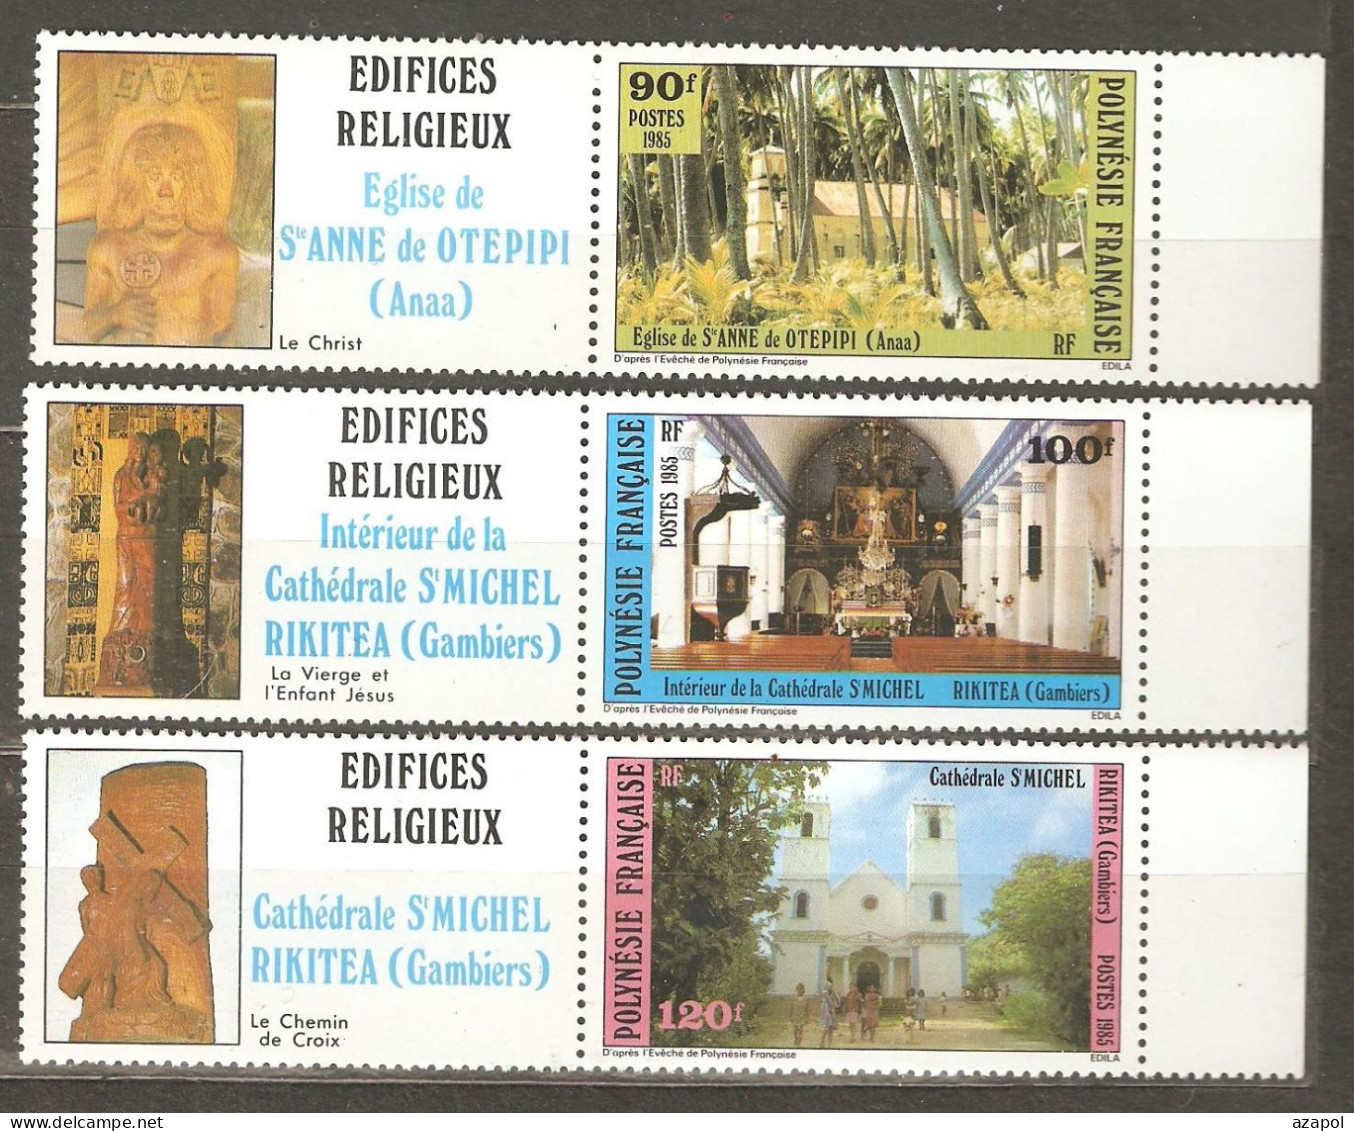 Polynesia: Full Set Of 3 Mint Stamps With Labels, Catholic Churches, 1985, Mi#439-441, MNH - Neufs